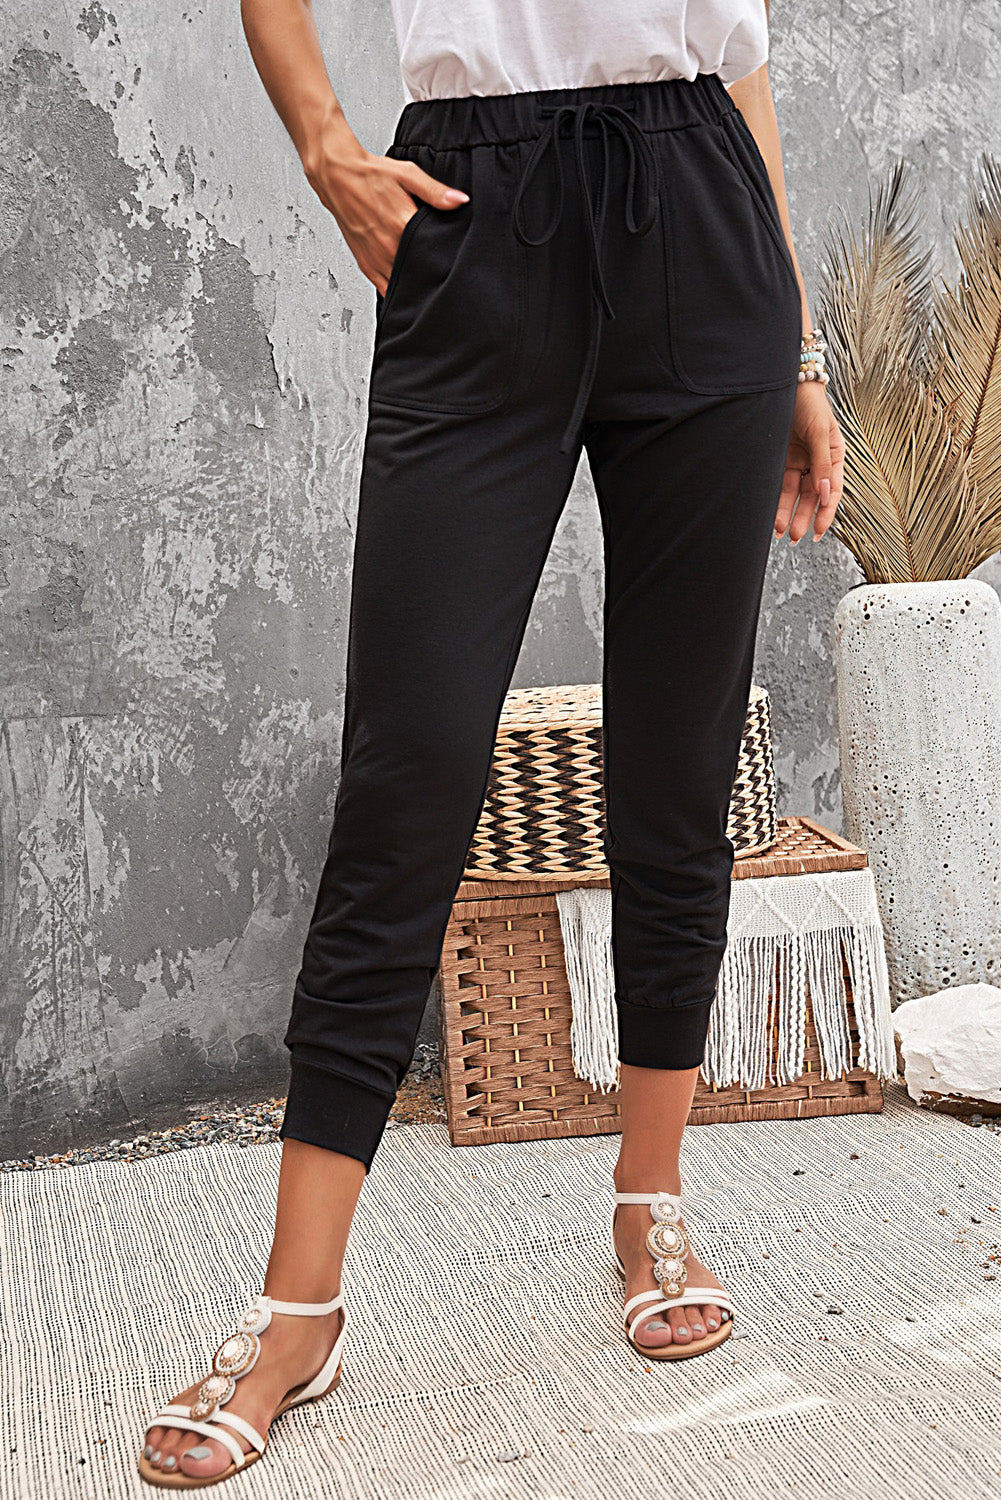 Women's Casual Black Pocketed Drawstring Sports Joggers